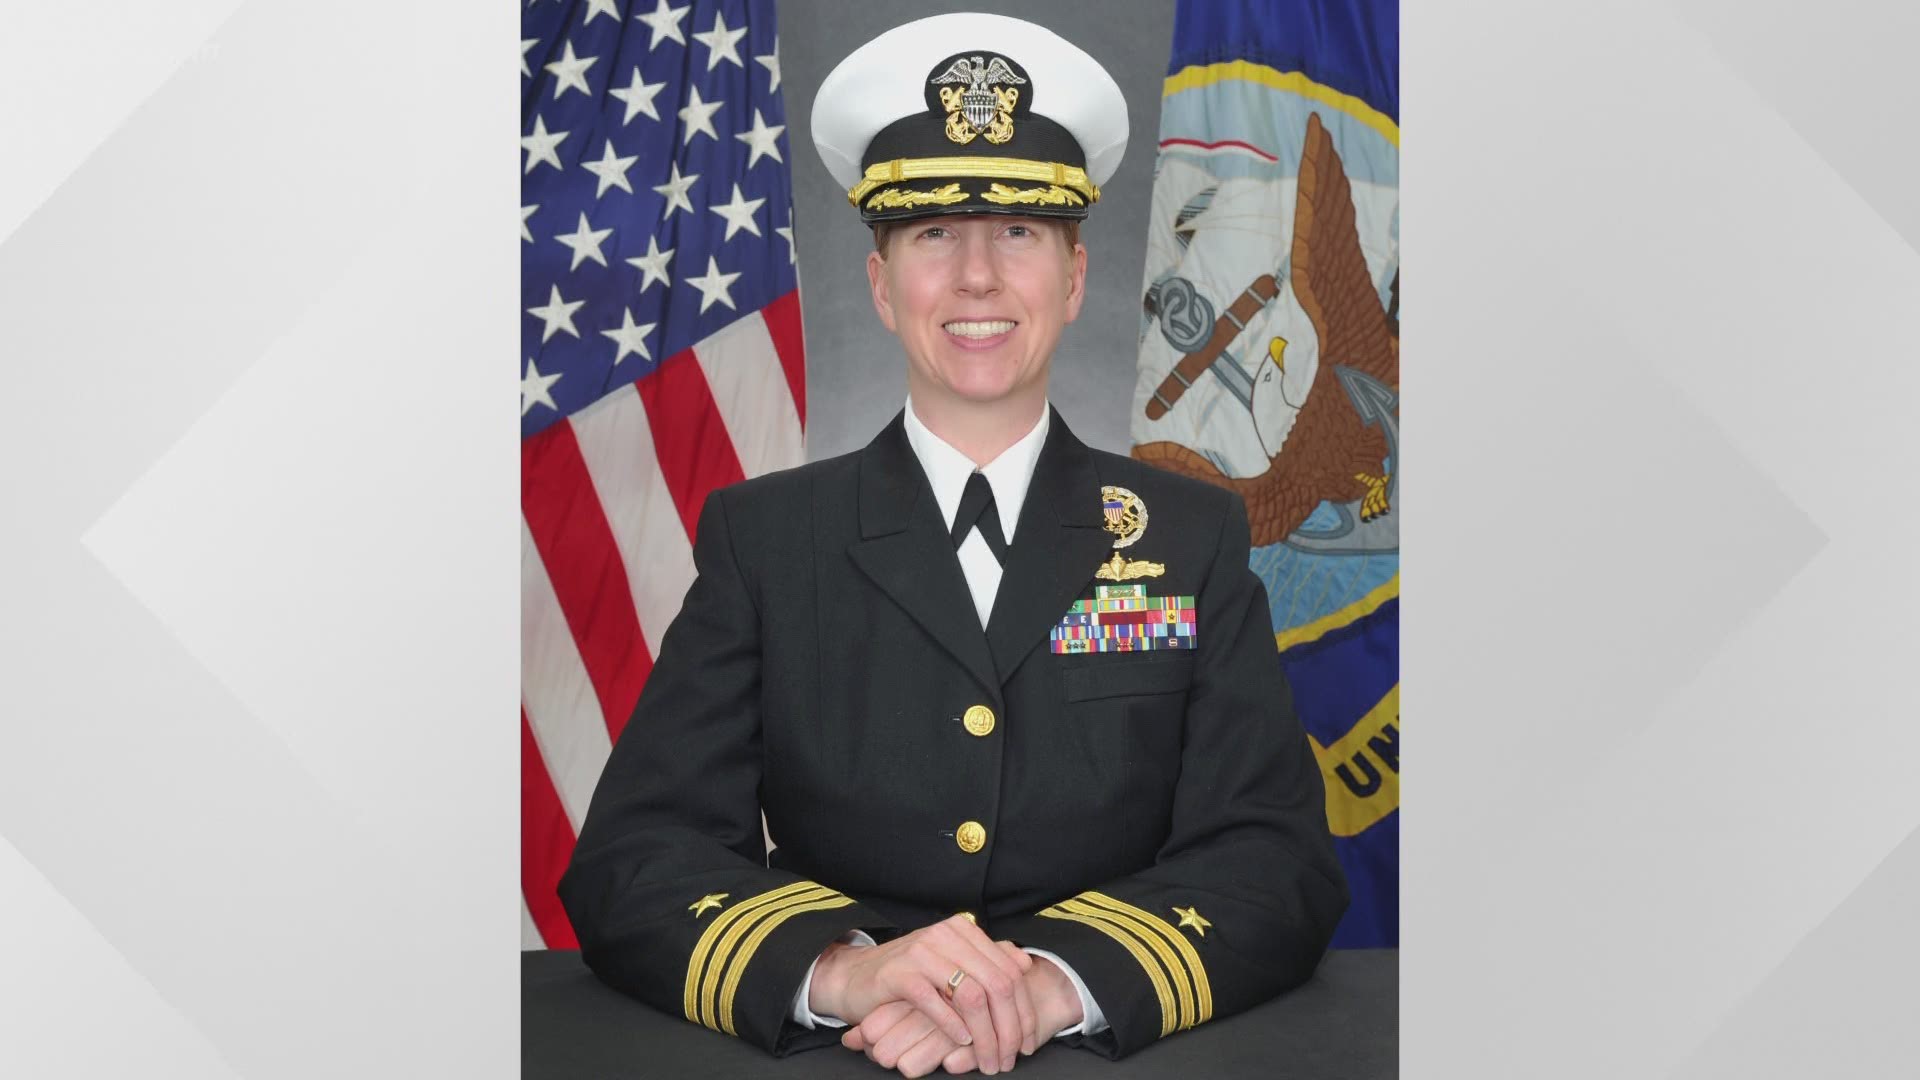 Cmdr. Stacy M. Wuthier, a Denver native, assumed command of the USS Jackson last Friday.